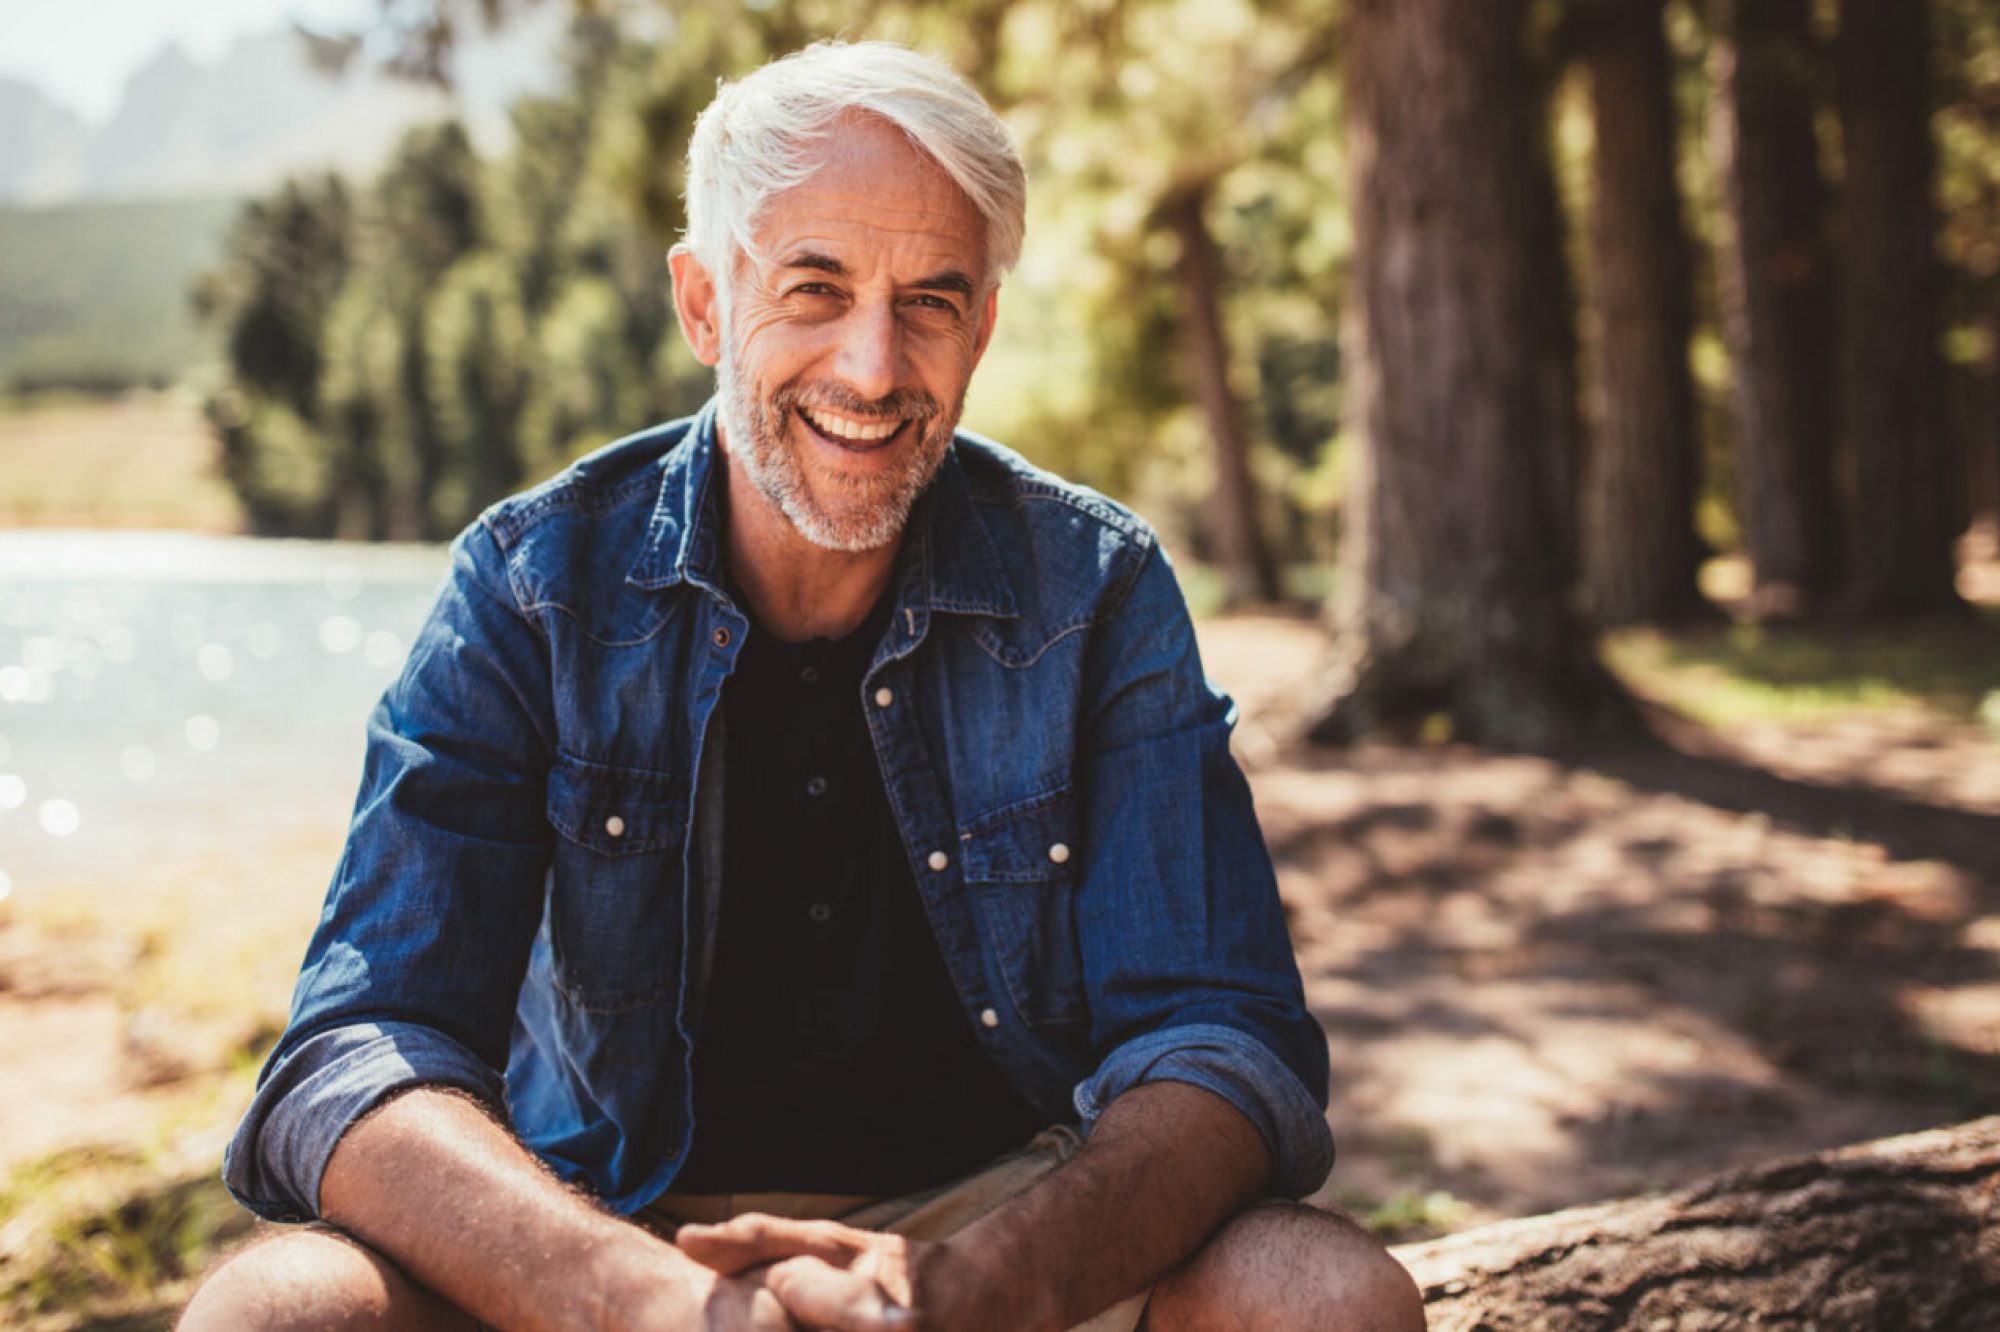 Portrait of happy mature man sitting near a lake looking at camera and smiling. Senior caucasian man sitting on a log by the lake on a summer day.